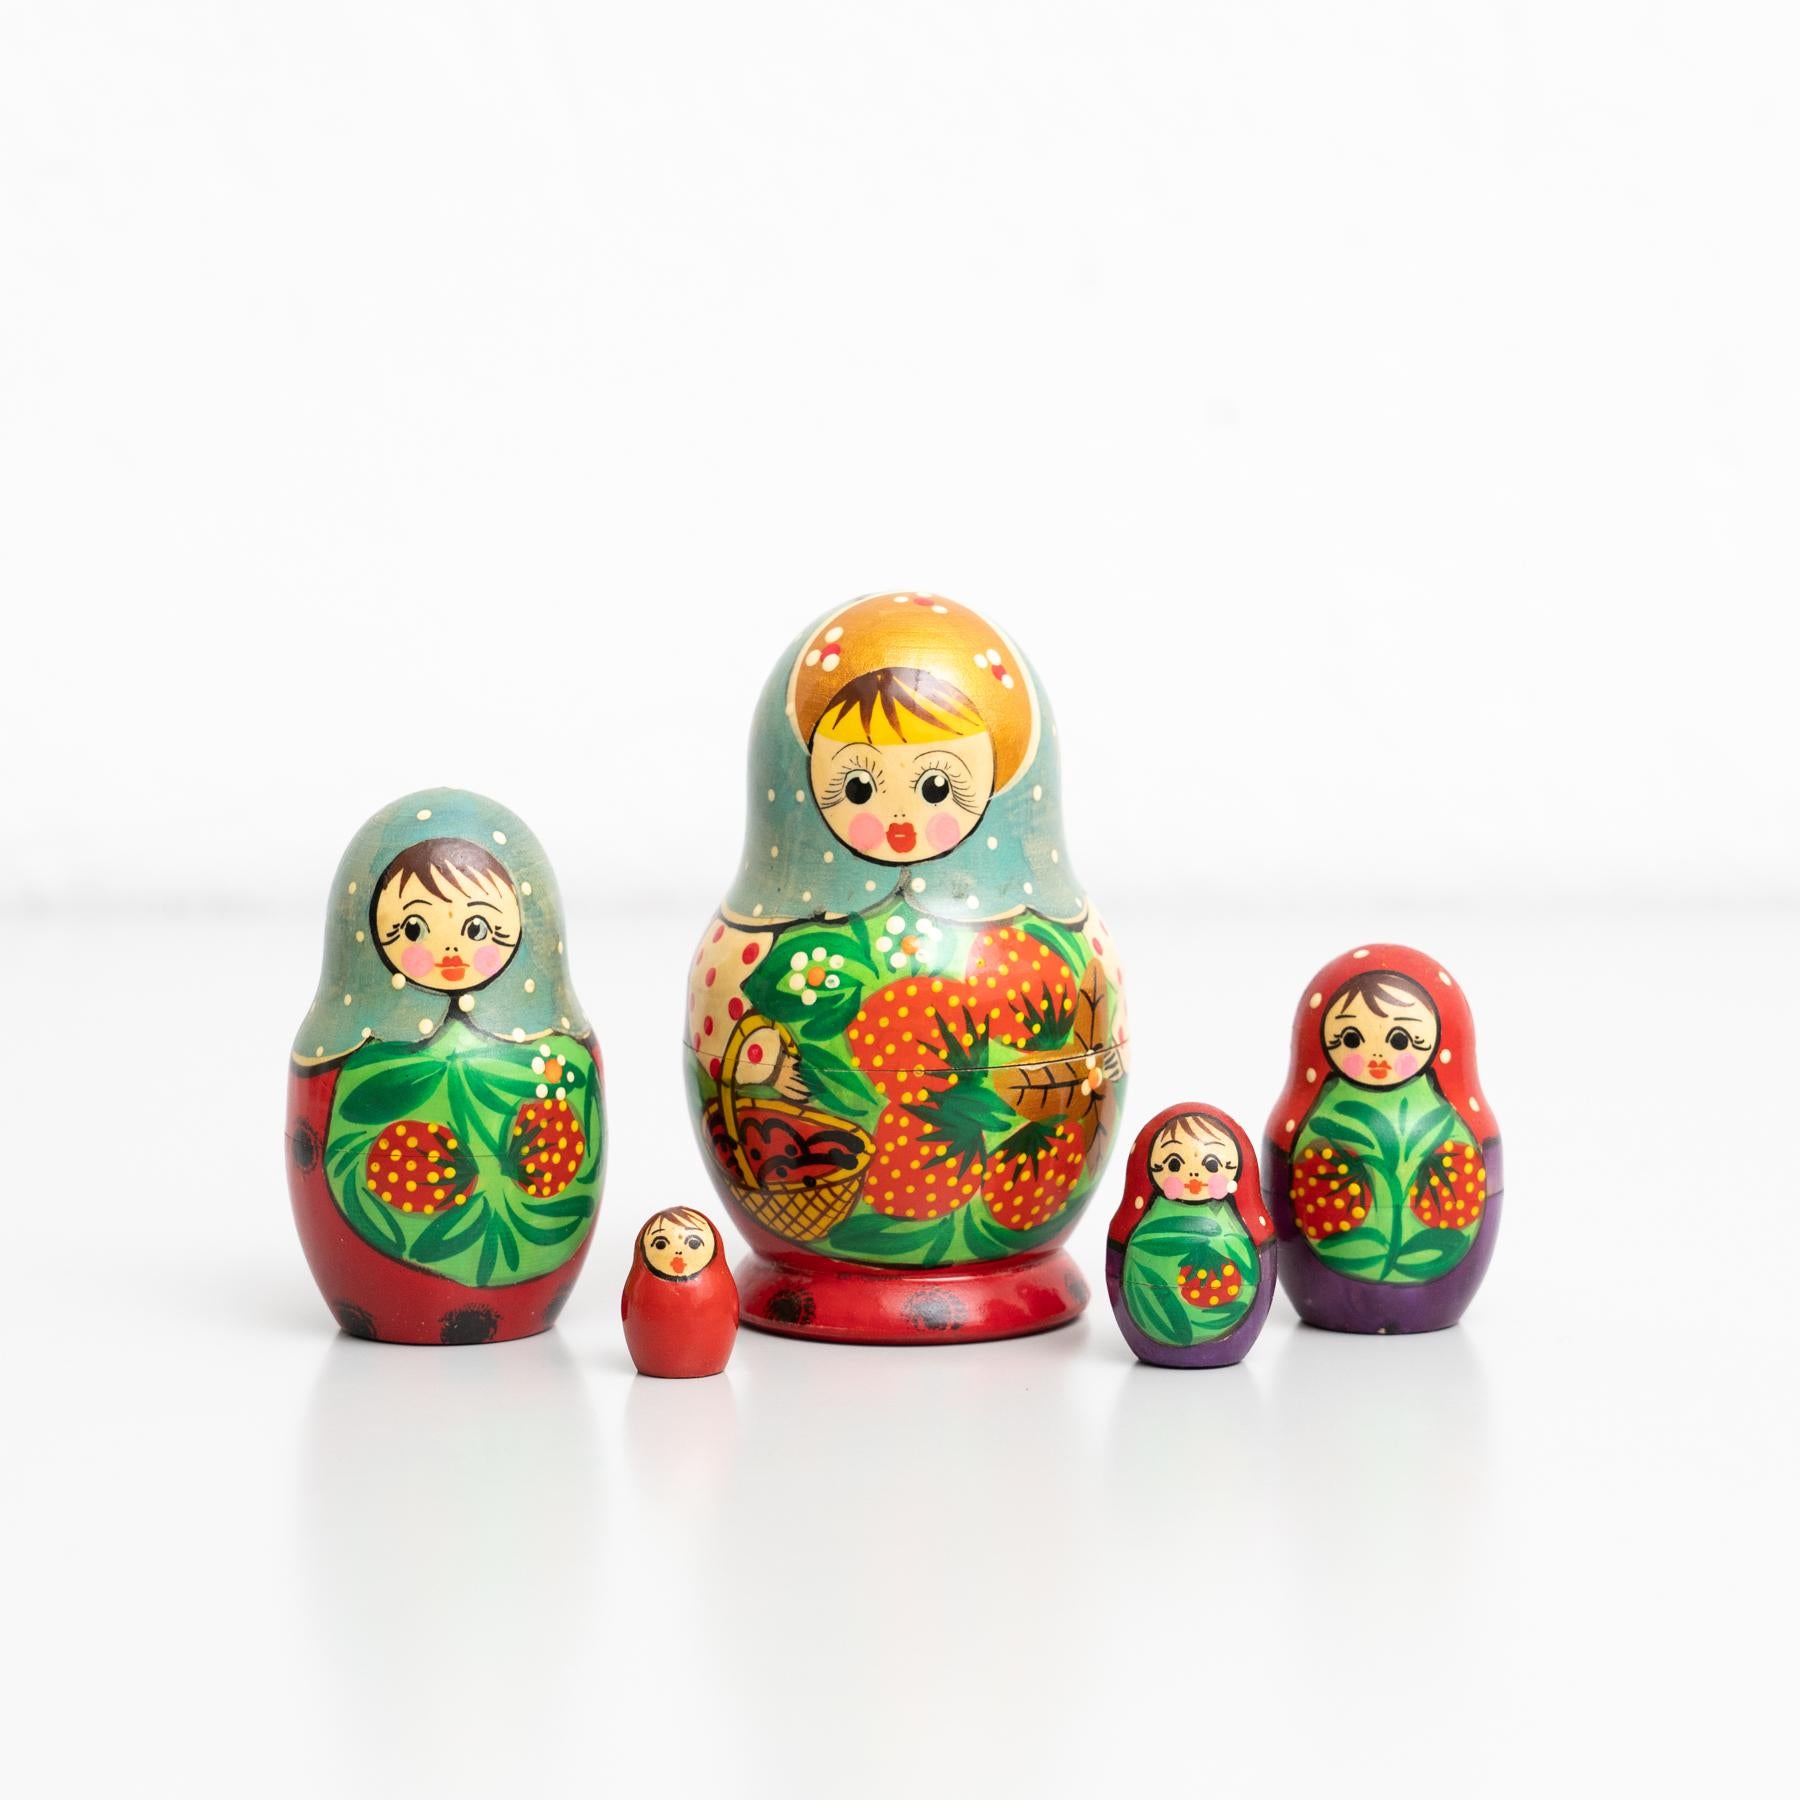 Antique Traditional Hand-Painted Wooden Russian Doll, circa 1960 For Sale 7